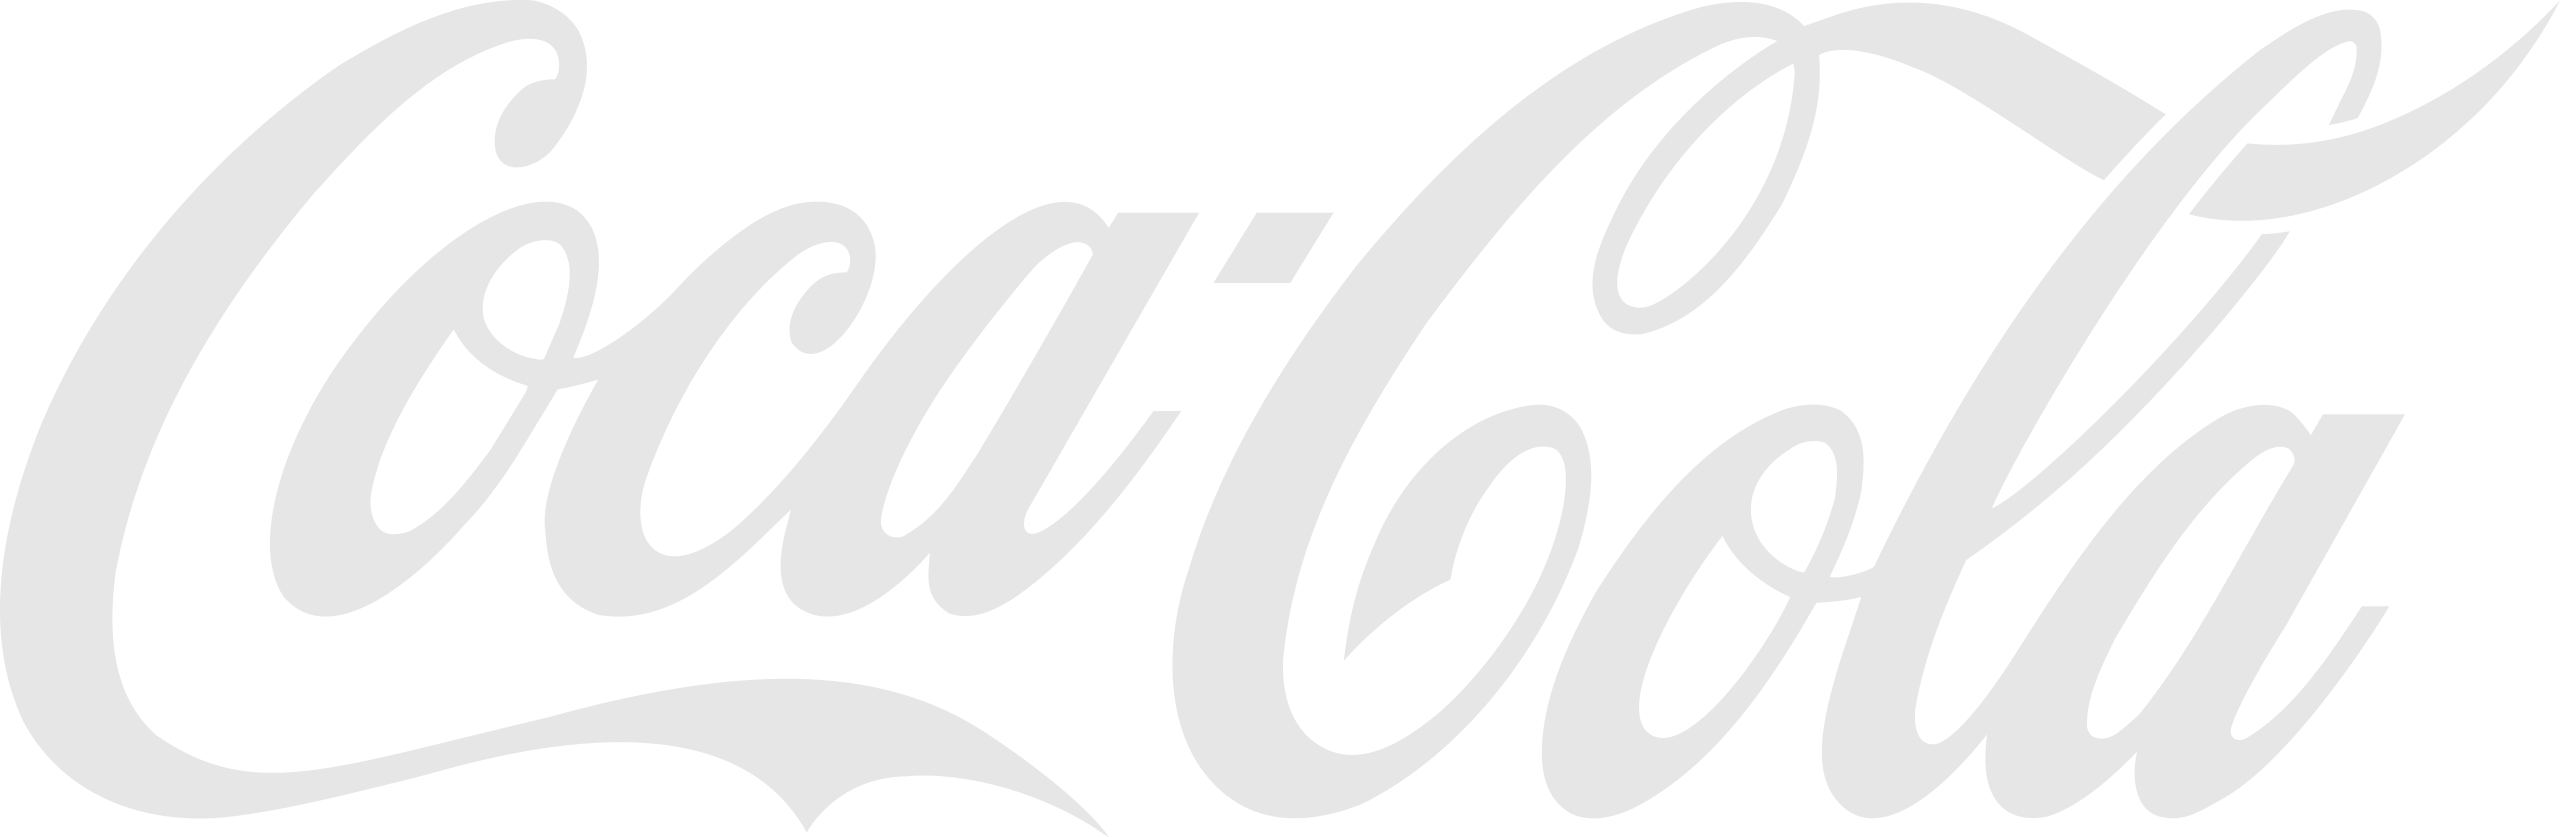 Coca Cola Partners With Dycem For Food Industry Contamination Control